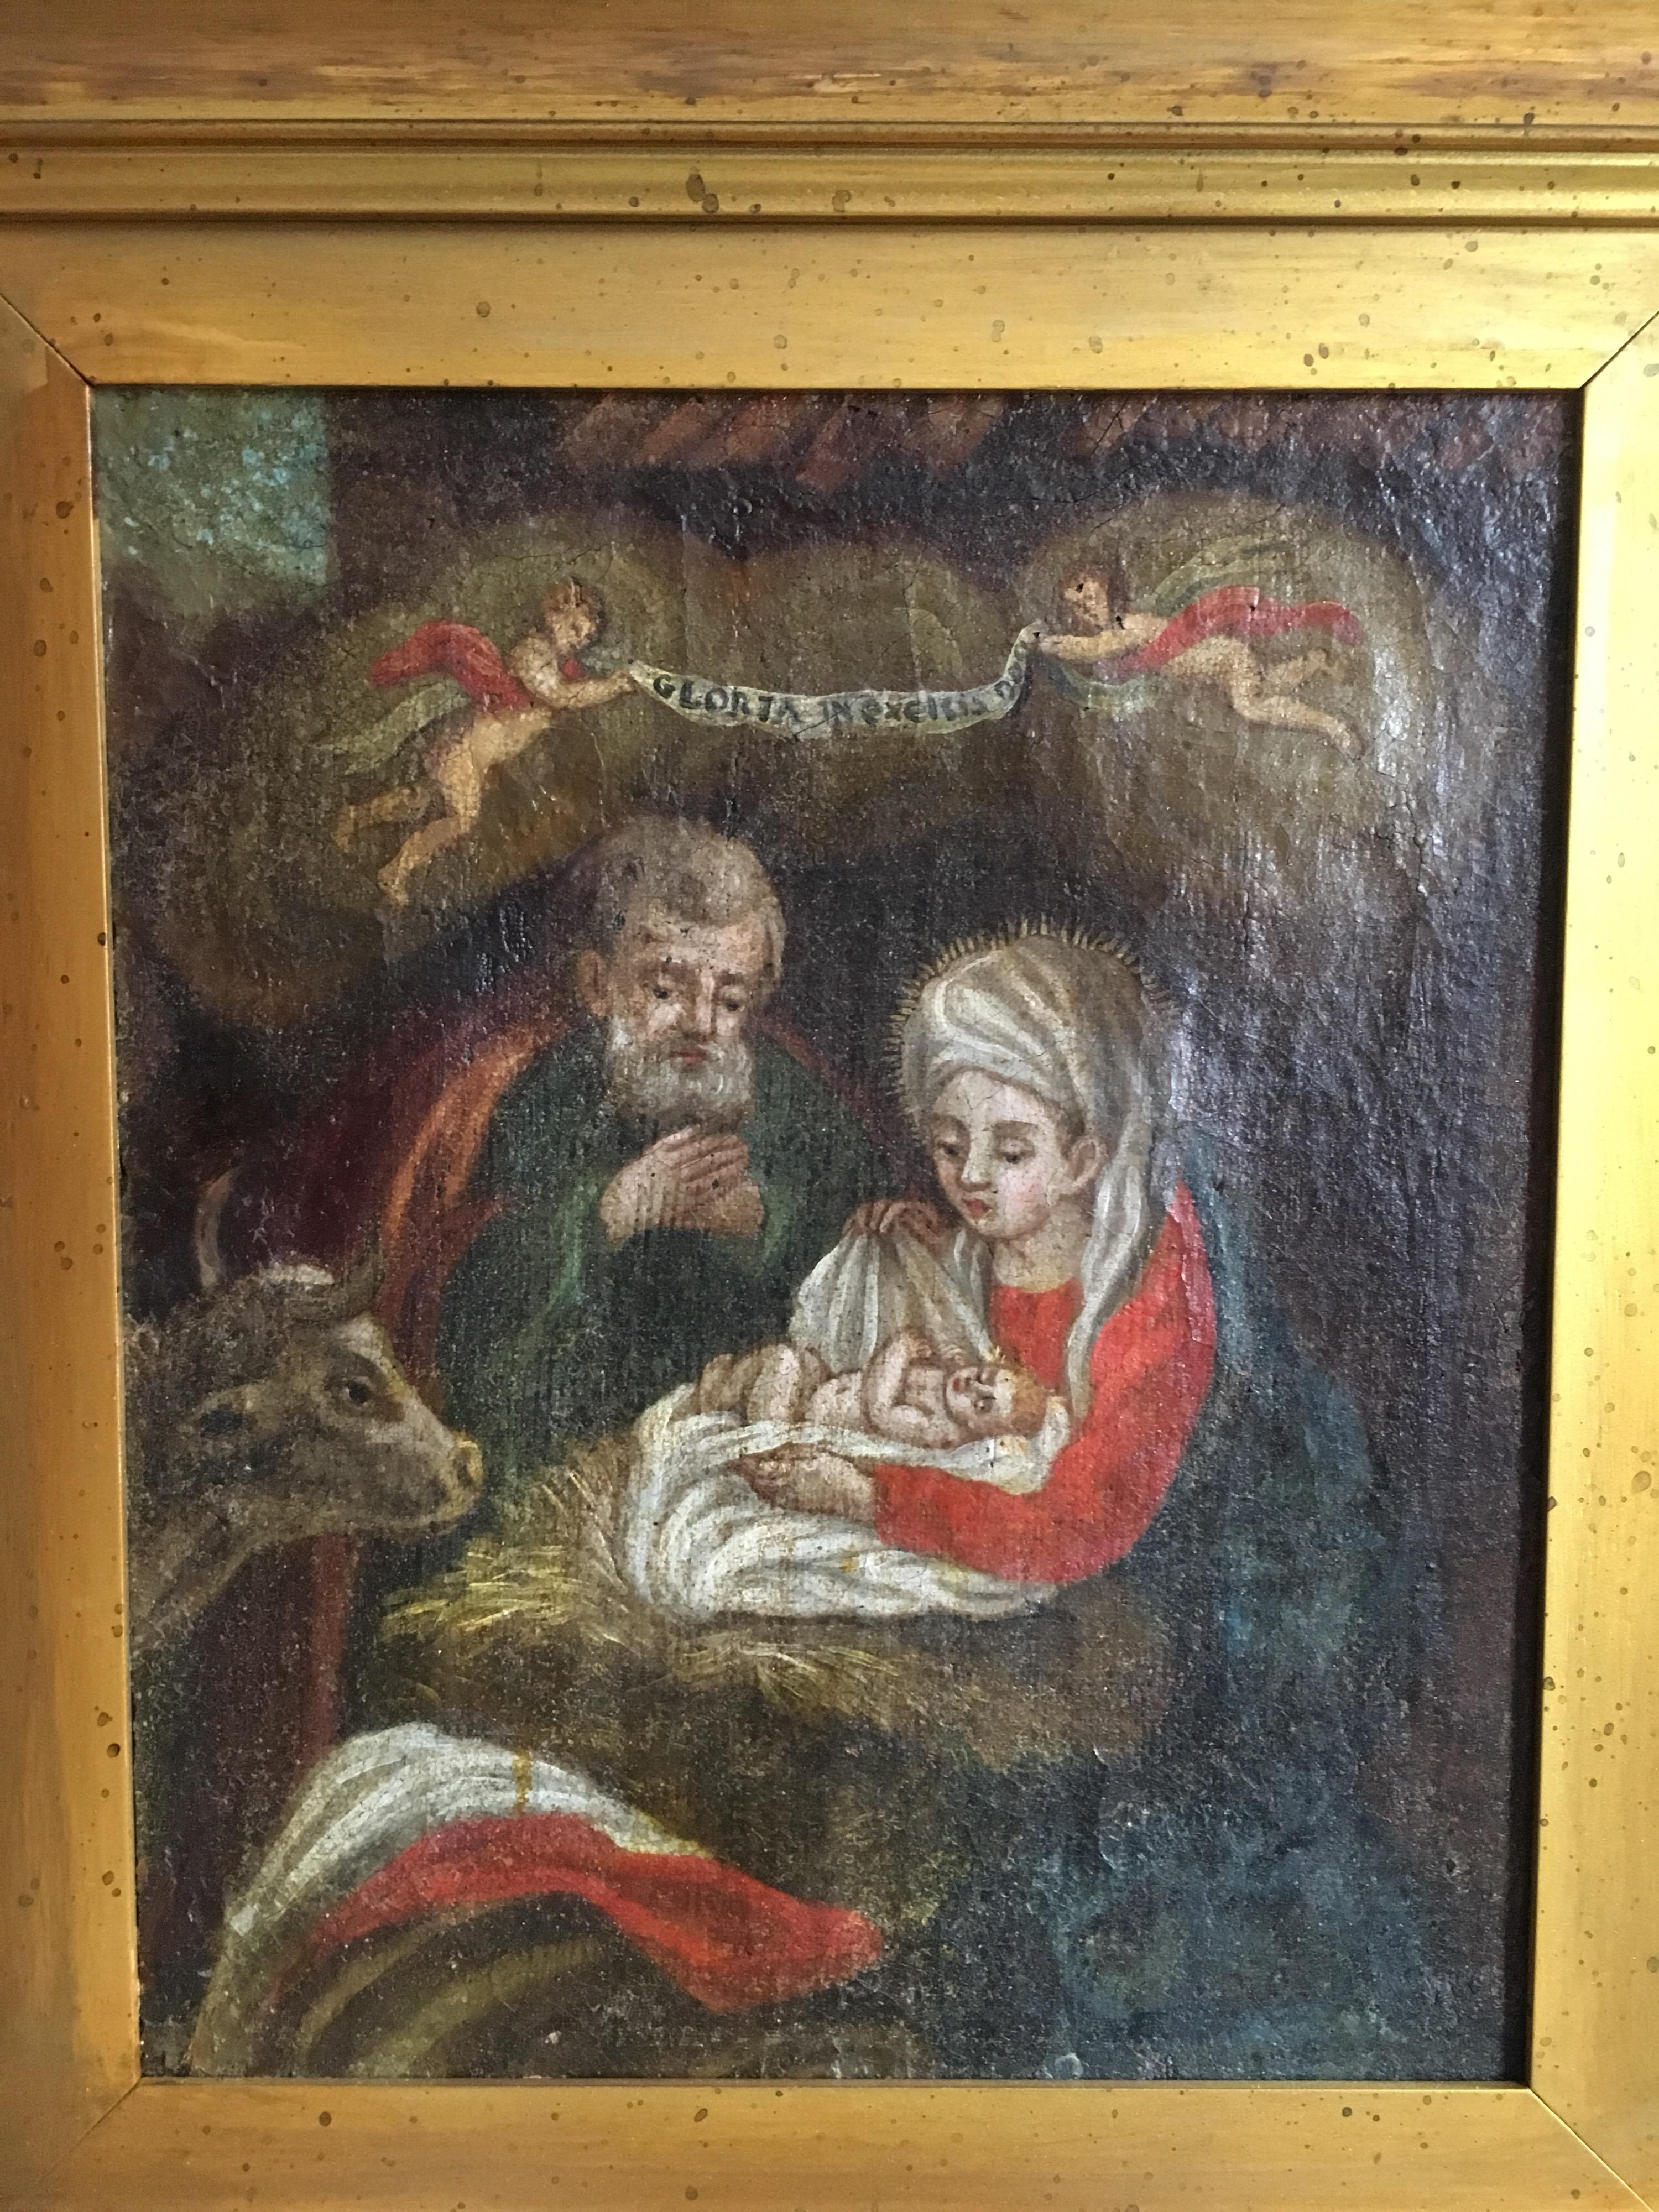 Birth of Christ, Religious Triptych Antique Oil Painting
Italian School, circa 1720's
set of three oil paintings on canvas, framed as one
total framed size: 20.5 x 44 inches

Captivating religious triptych oil painting, dating to the early 1700's